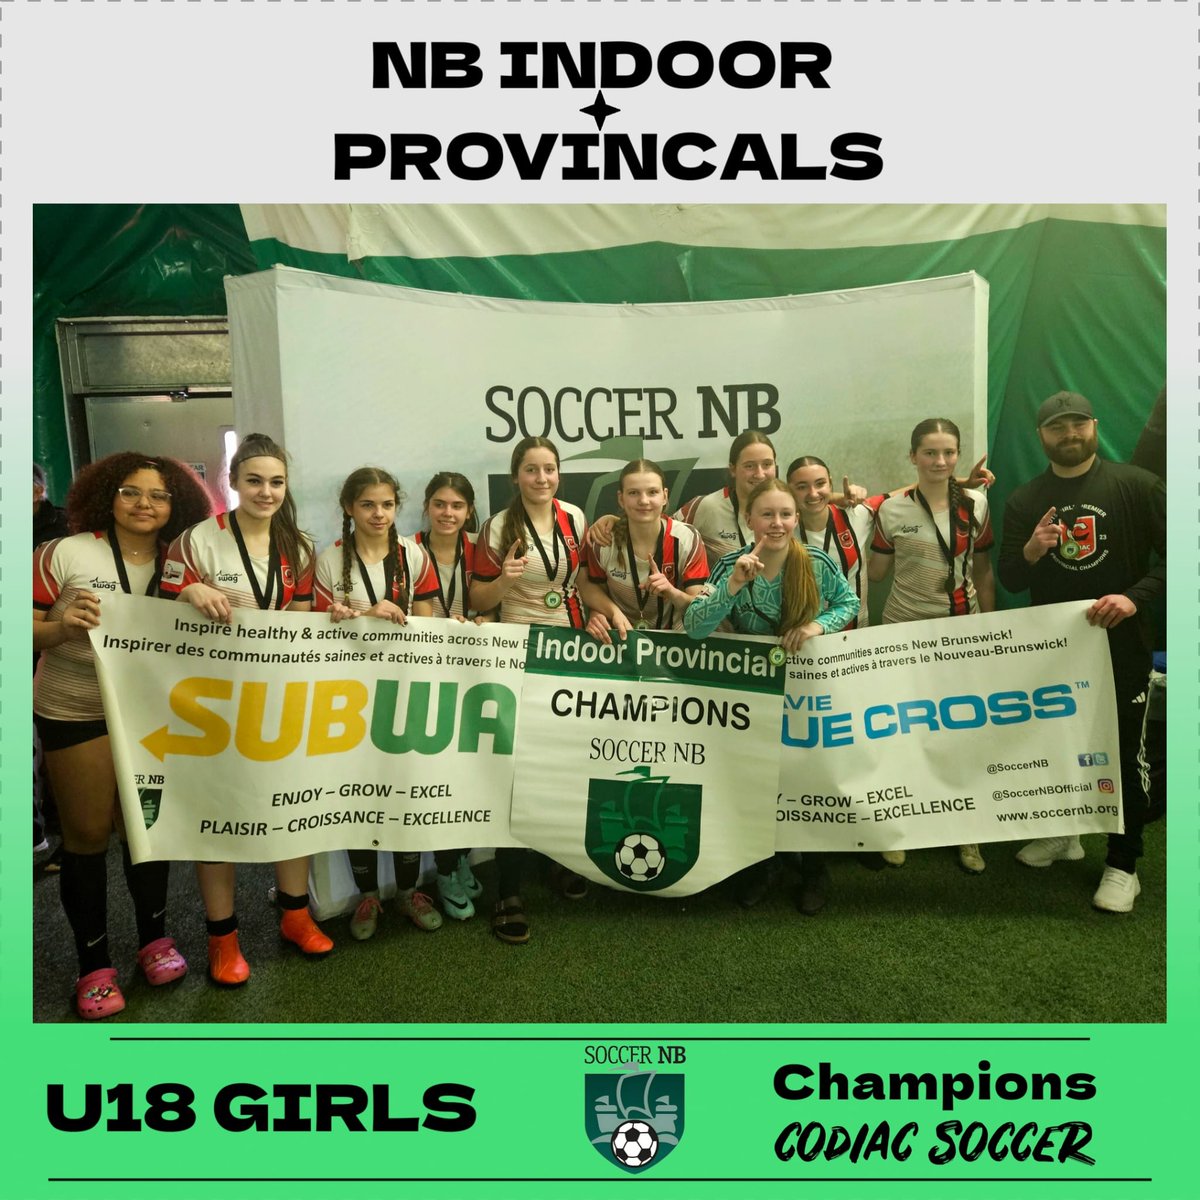 Congratulations to the finalists of last weekend's Indoor Provincial Championships and all the teams who participated, despite weather concerns to make this event a grand success! Special thanks to our sponsors Subway & Medavie Blue Cross. U13, U15, and U18 Girls ⚽️👇